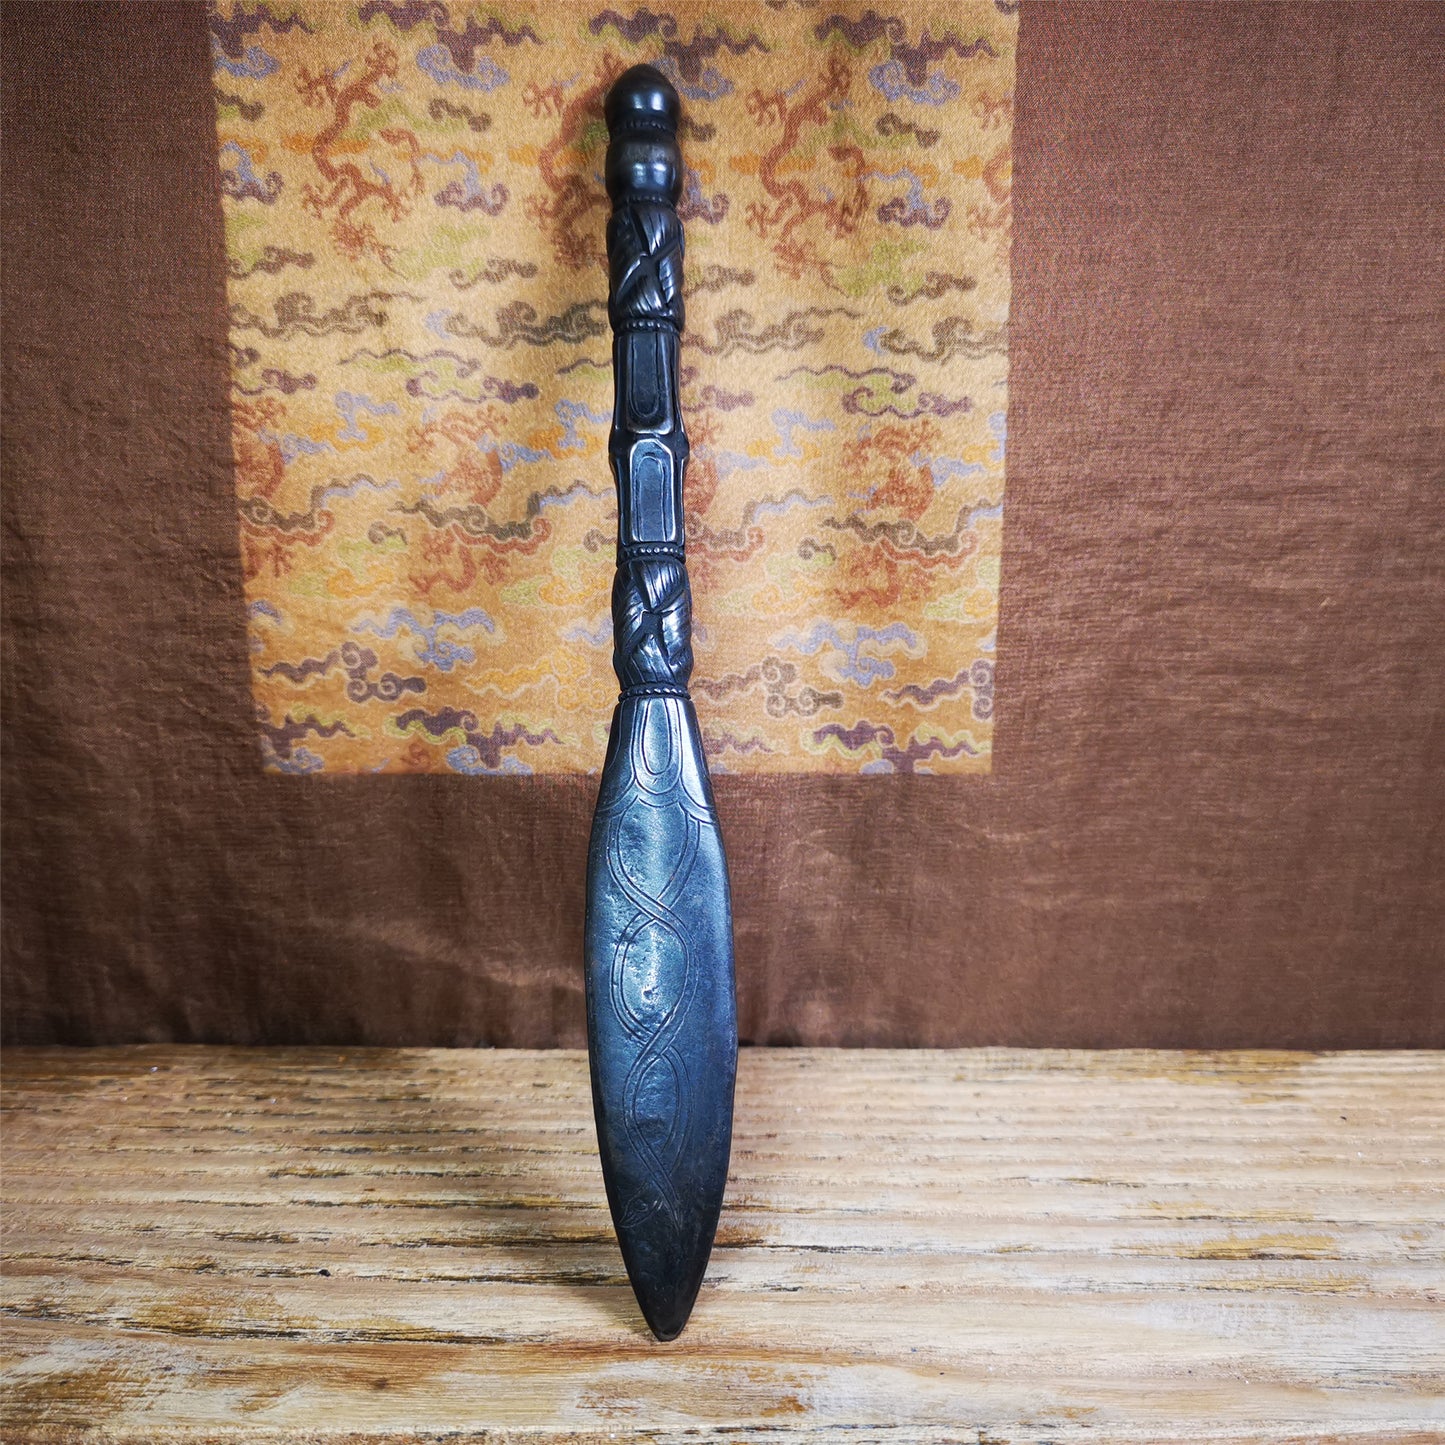 Gandhanra Tibetan Buddhist Ritual Implement - Kila -Dorje Phurba,Made of Cold Iron and Copper.It is 9" length,black type,carved double helix pattern,handmade by Tibetan craftsmen from Tibet in 1990's.